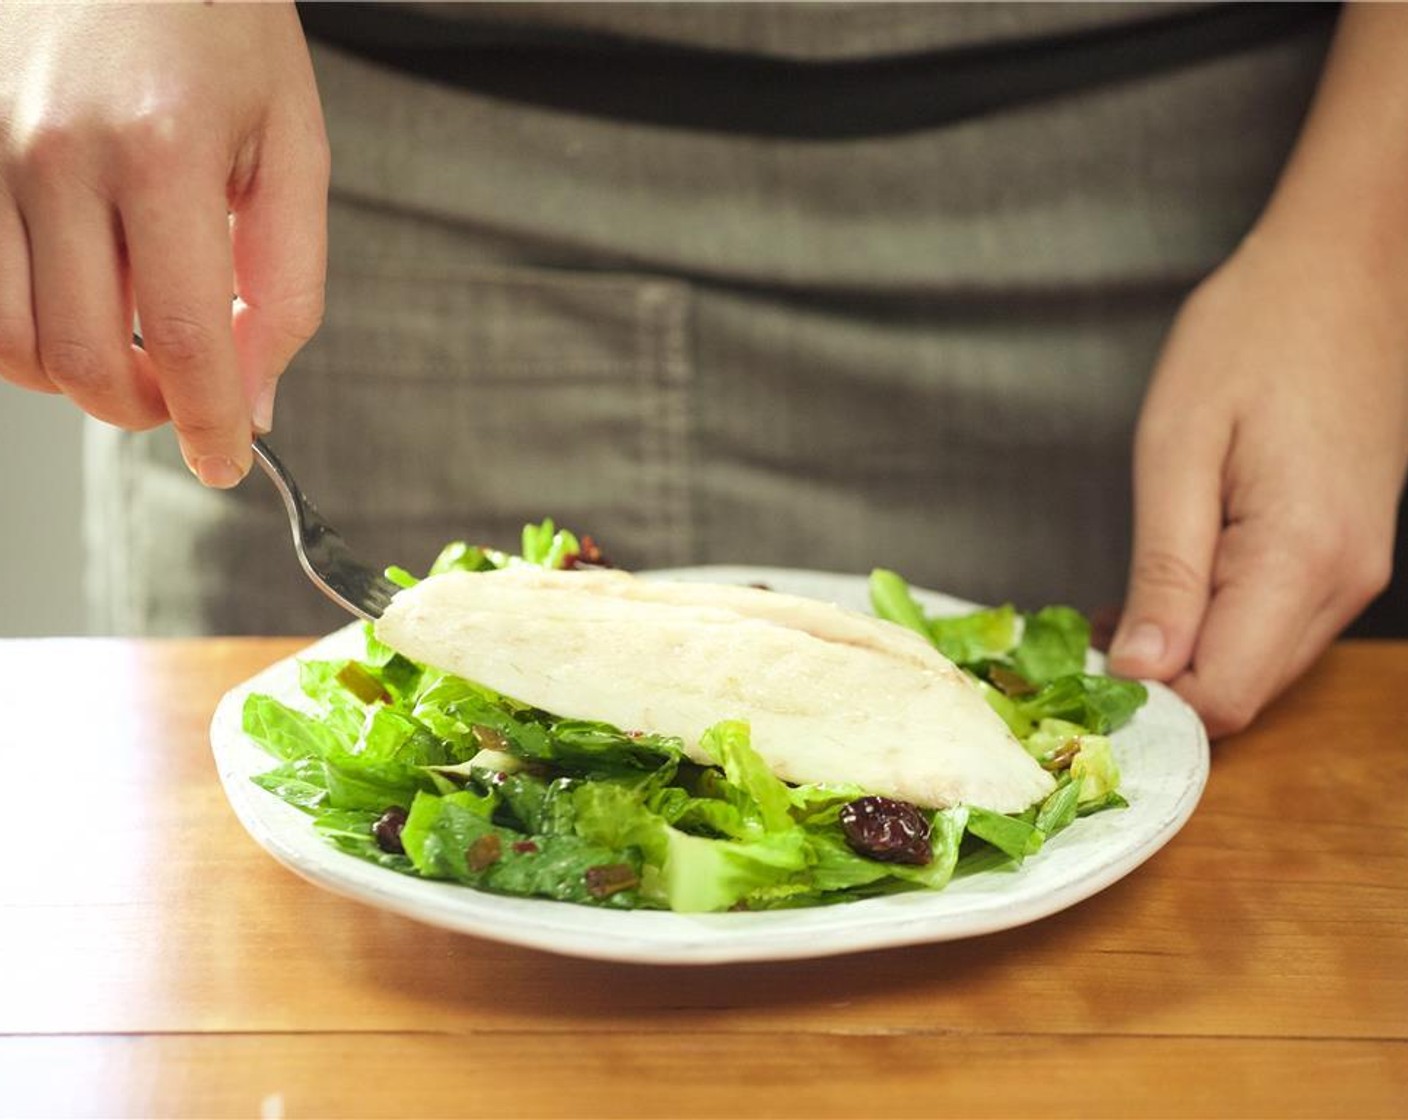 step 9 In the center of two plates, evenly distribute the salad. Place the red snapper over the salad and squeeze the remaining lemon over the fillets.